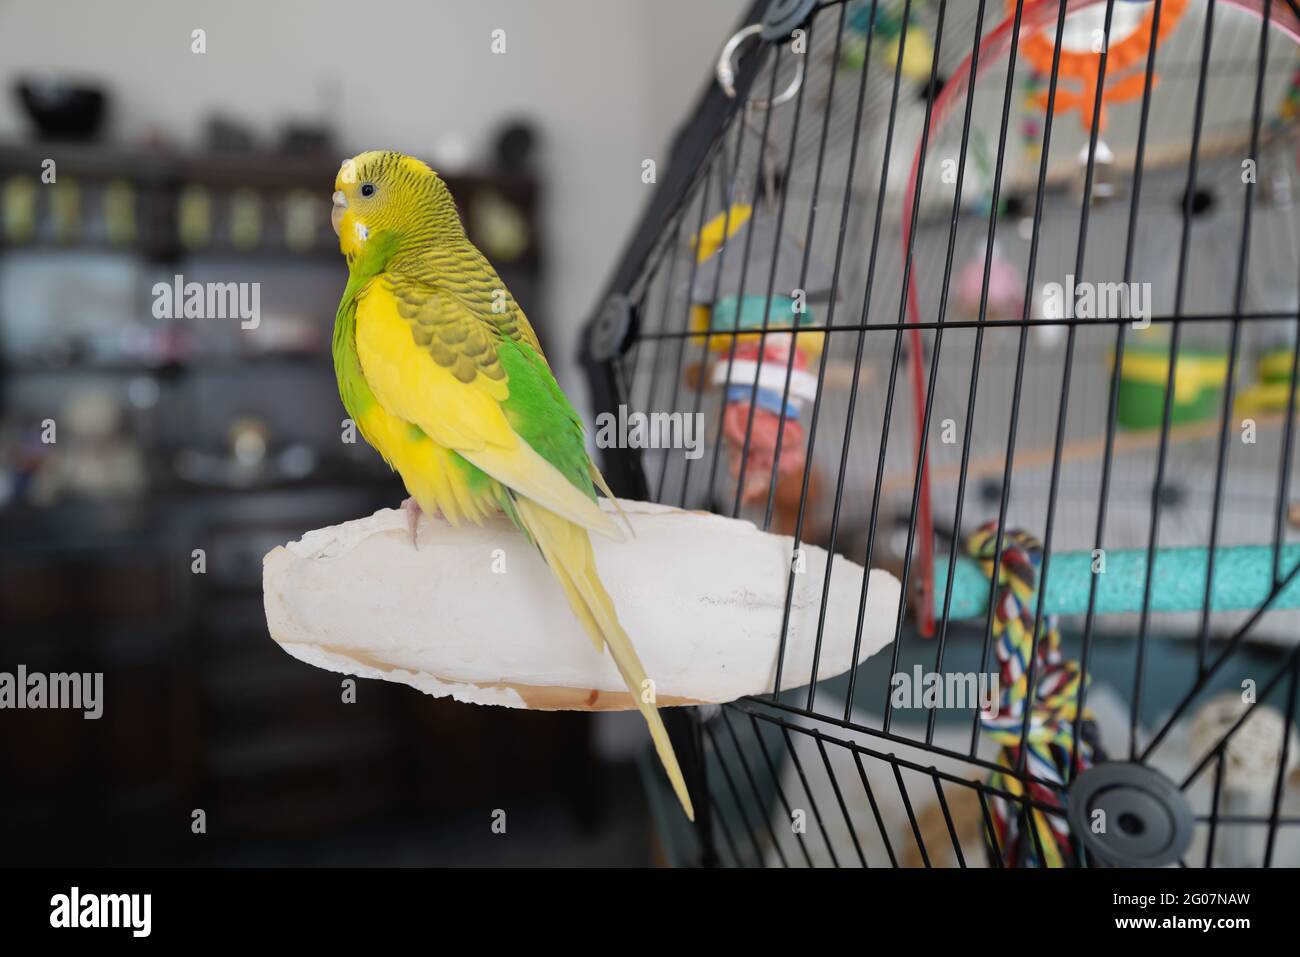 Portrait of a green and yellow budgerigar parakeet sitting on a cuttle fish bone on the side of her cage lit by window light. Stock Photo